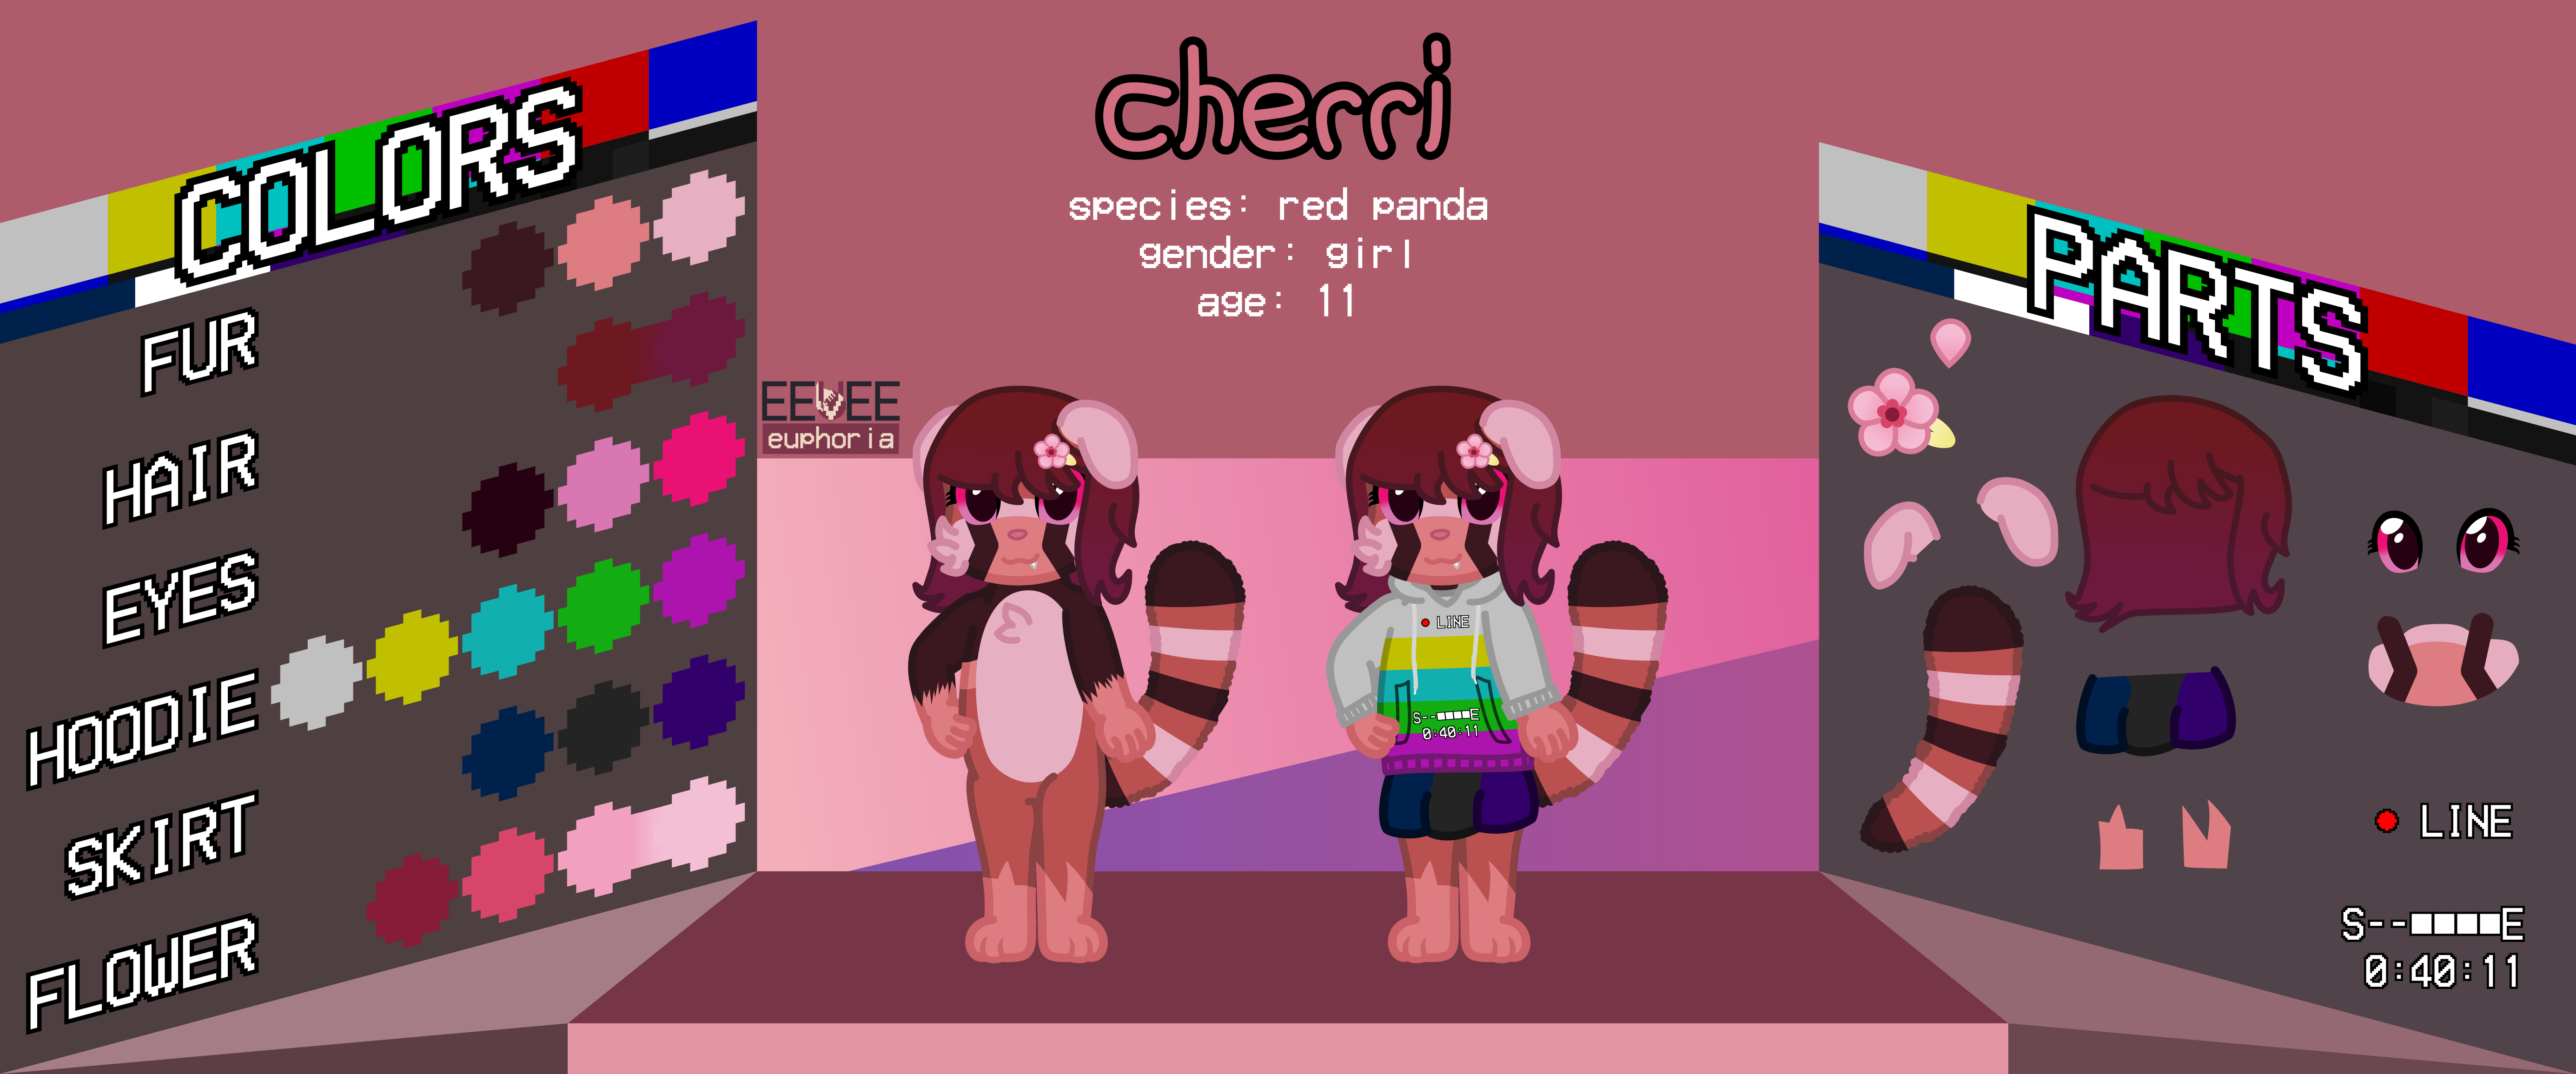 reference sheet for cherri, a 11 y/o red panda girl. shown is a creature wearing a hoodie reminiscent of the NTSC test pattern colors, and a skirt with some more of those colors. to the left is a version w/o clothes.